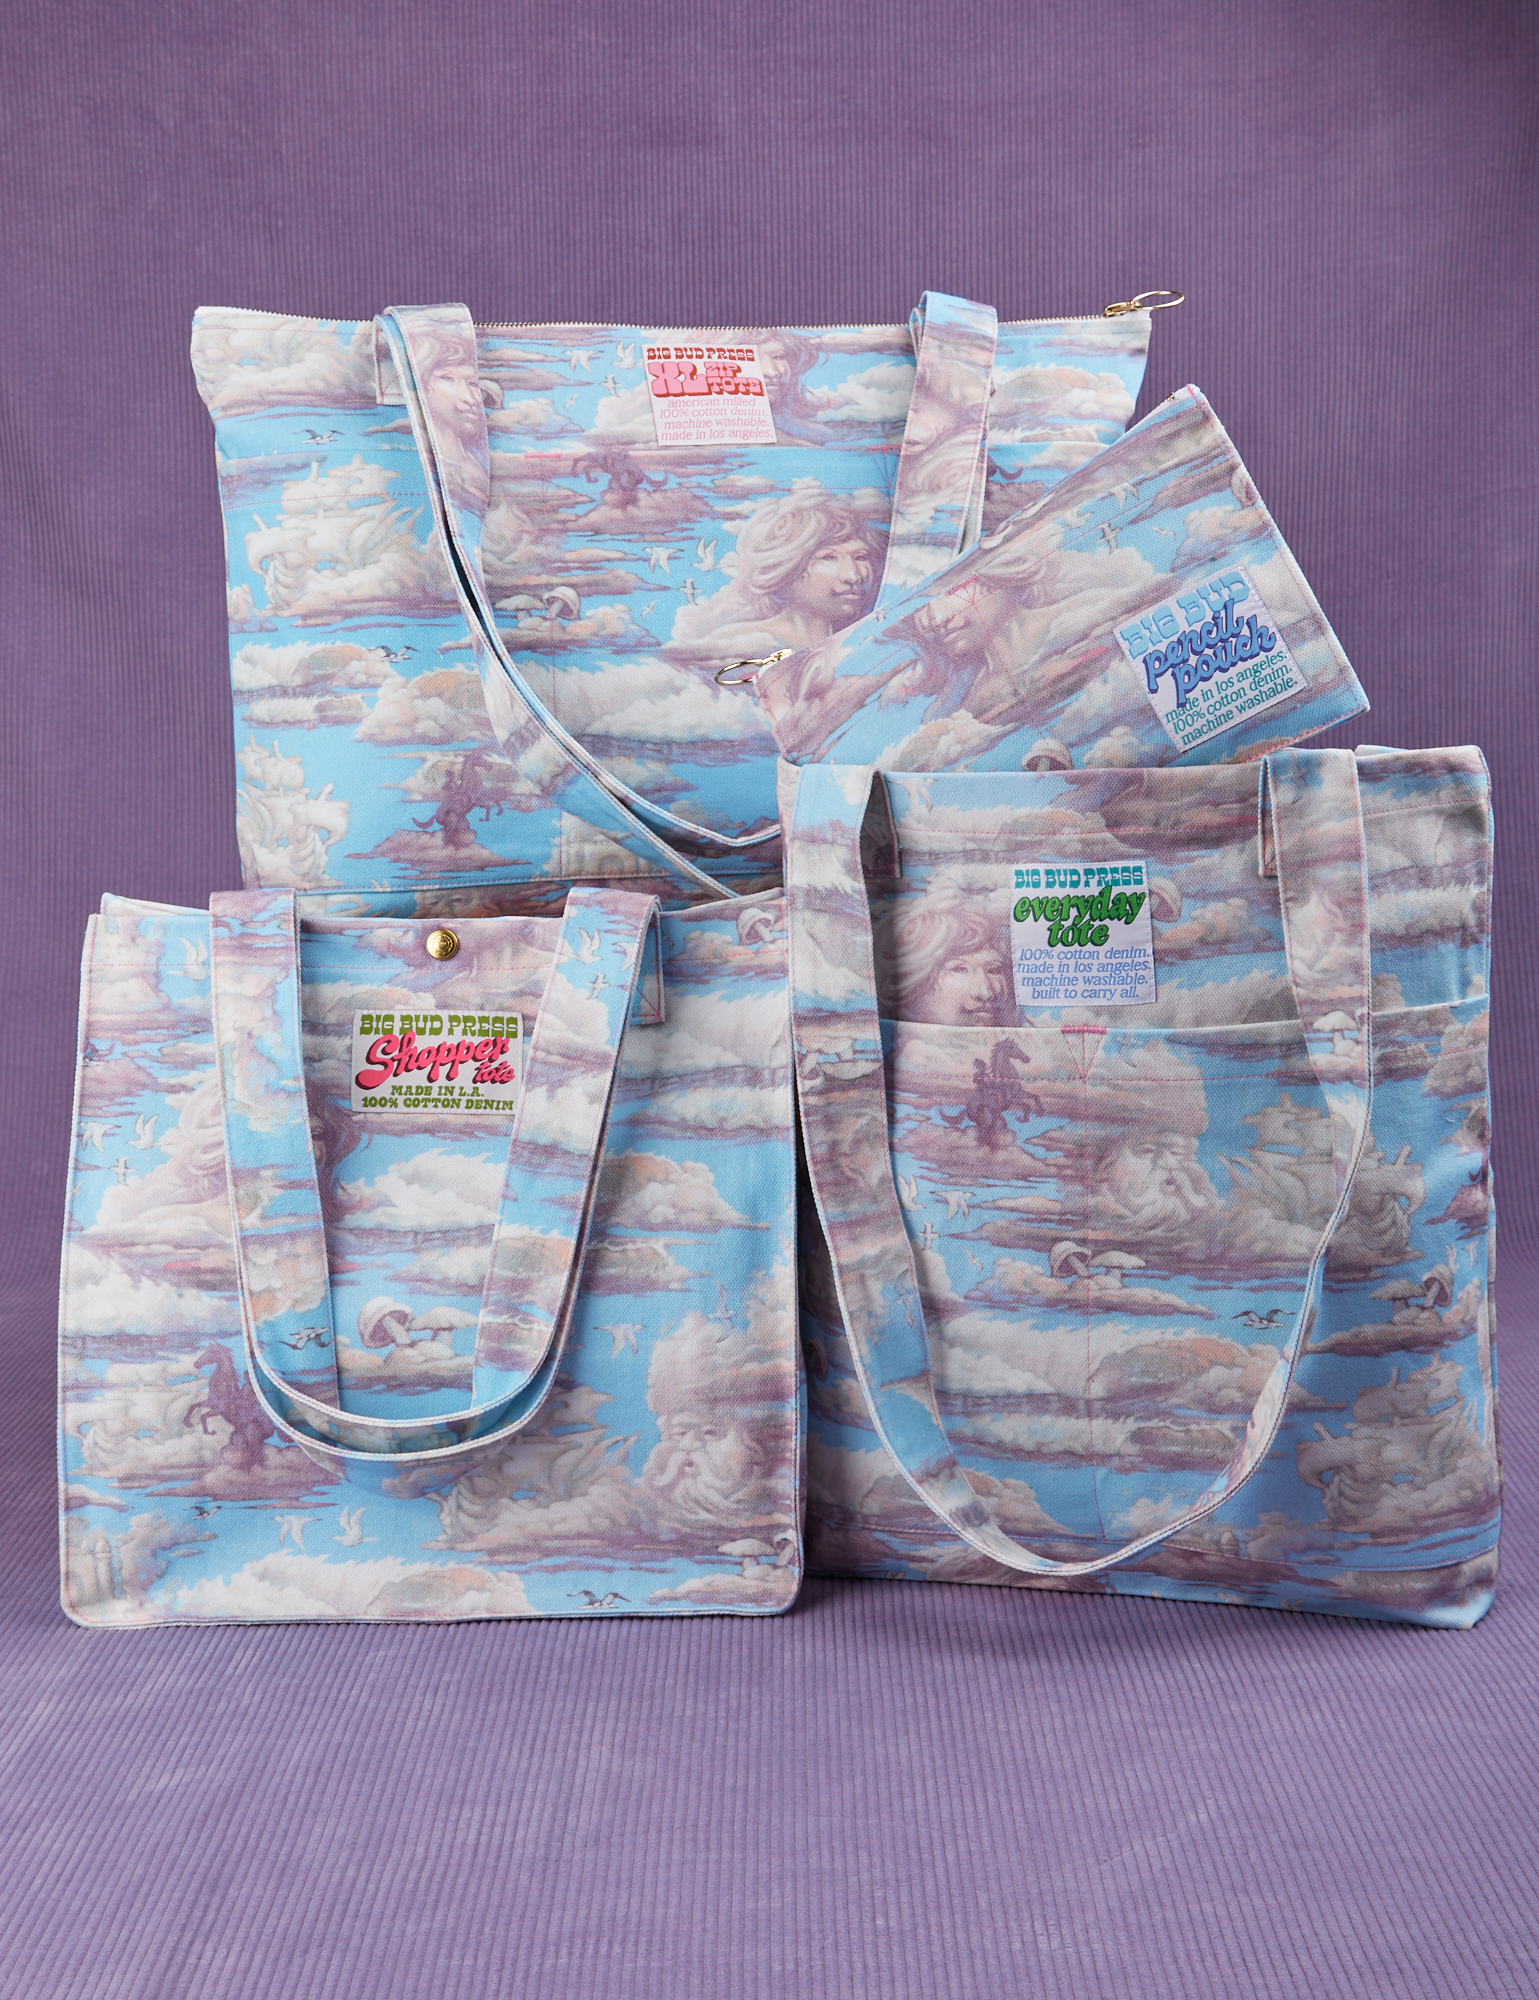 Cloud Kingdom bags featuring Shopper Tote, Everyday Tote, XL Zip Tote and Pencil Pouch